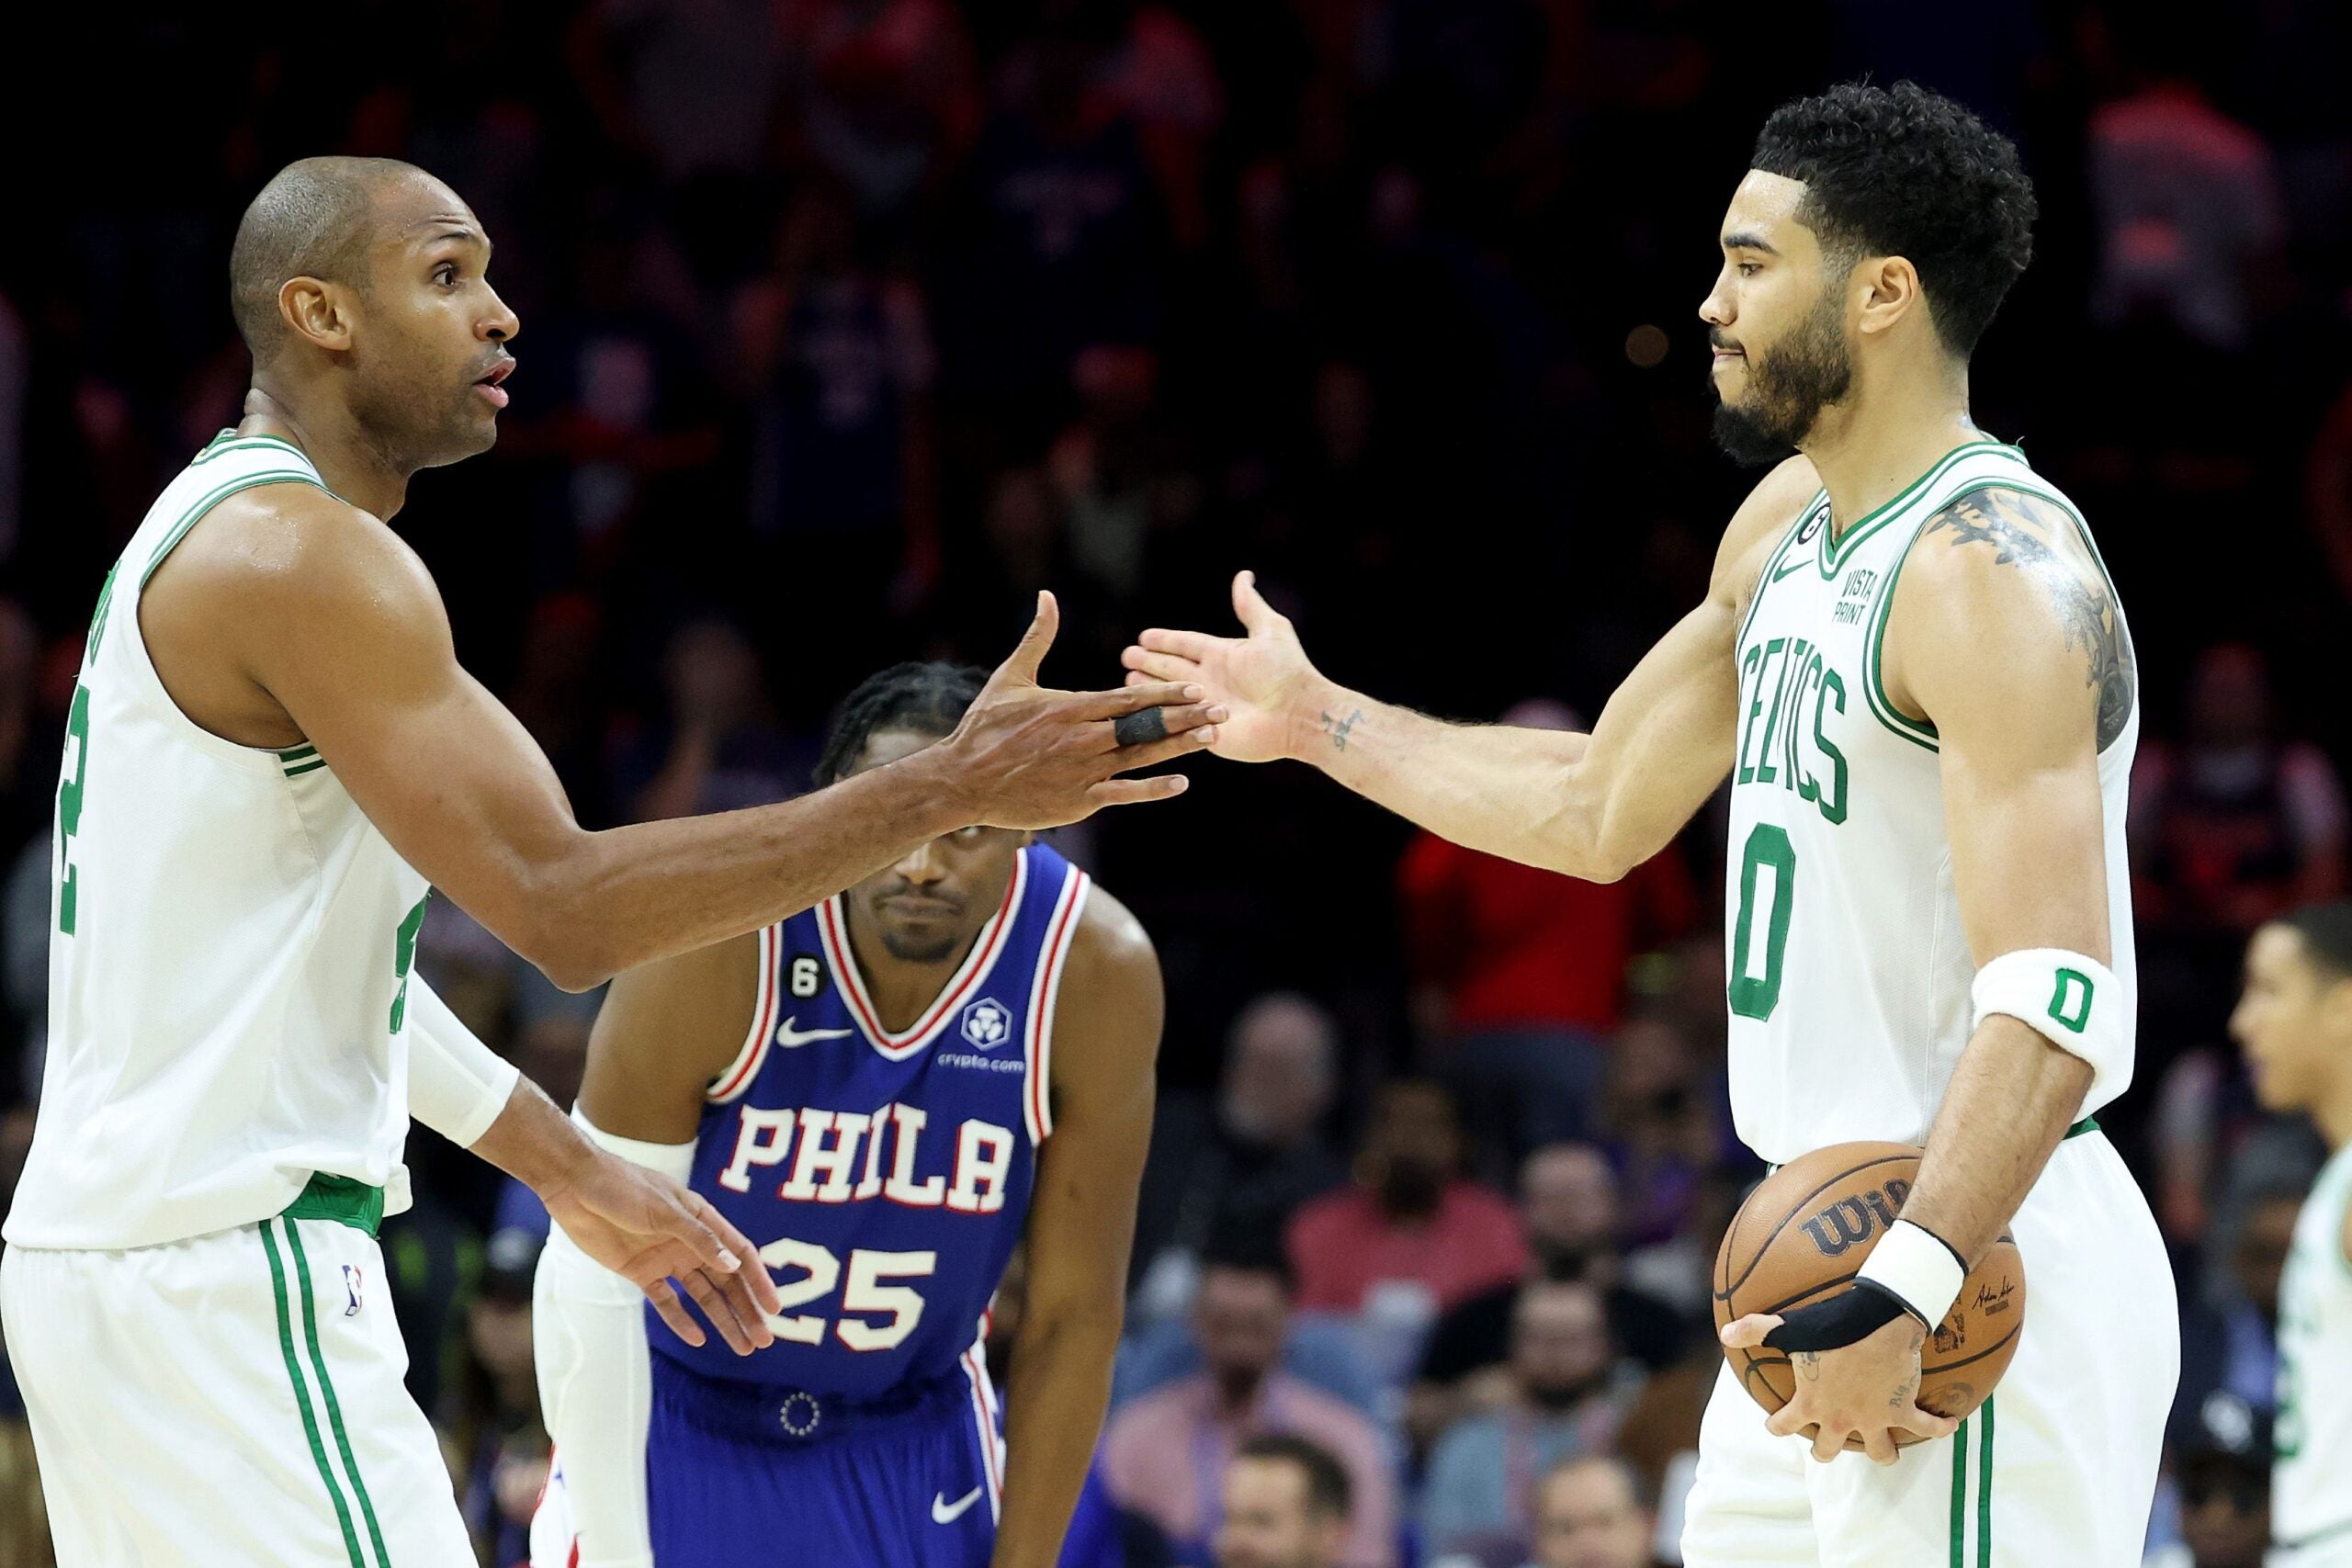 Al Horford #42 and Jayson Tatum #0 of the Boston Celtics celebrate after defeating the Philadelphia 76ers in game six in the Eastern Conference Semifinals in the 2023 NBA Playoffs at Wells Fargo Center on May 11, 2023 in Philadelphia, Pennsylvania.